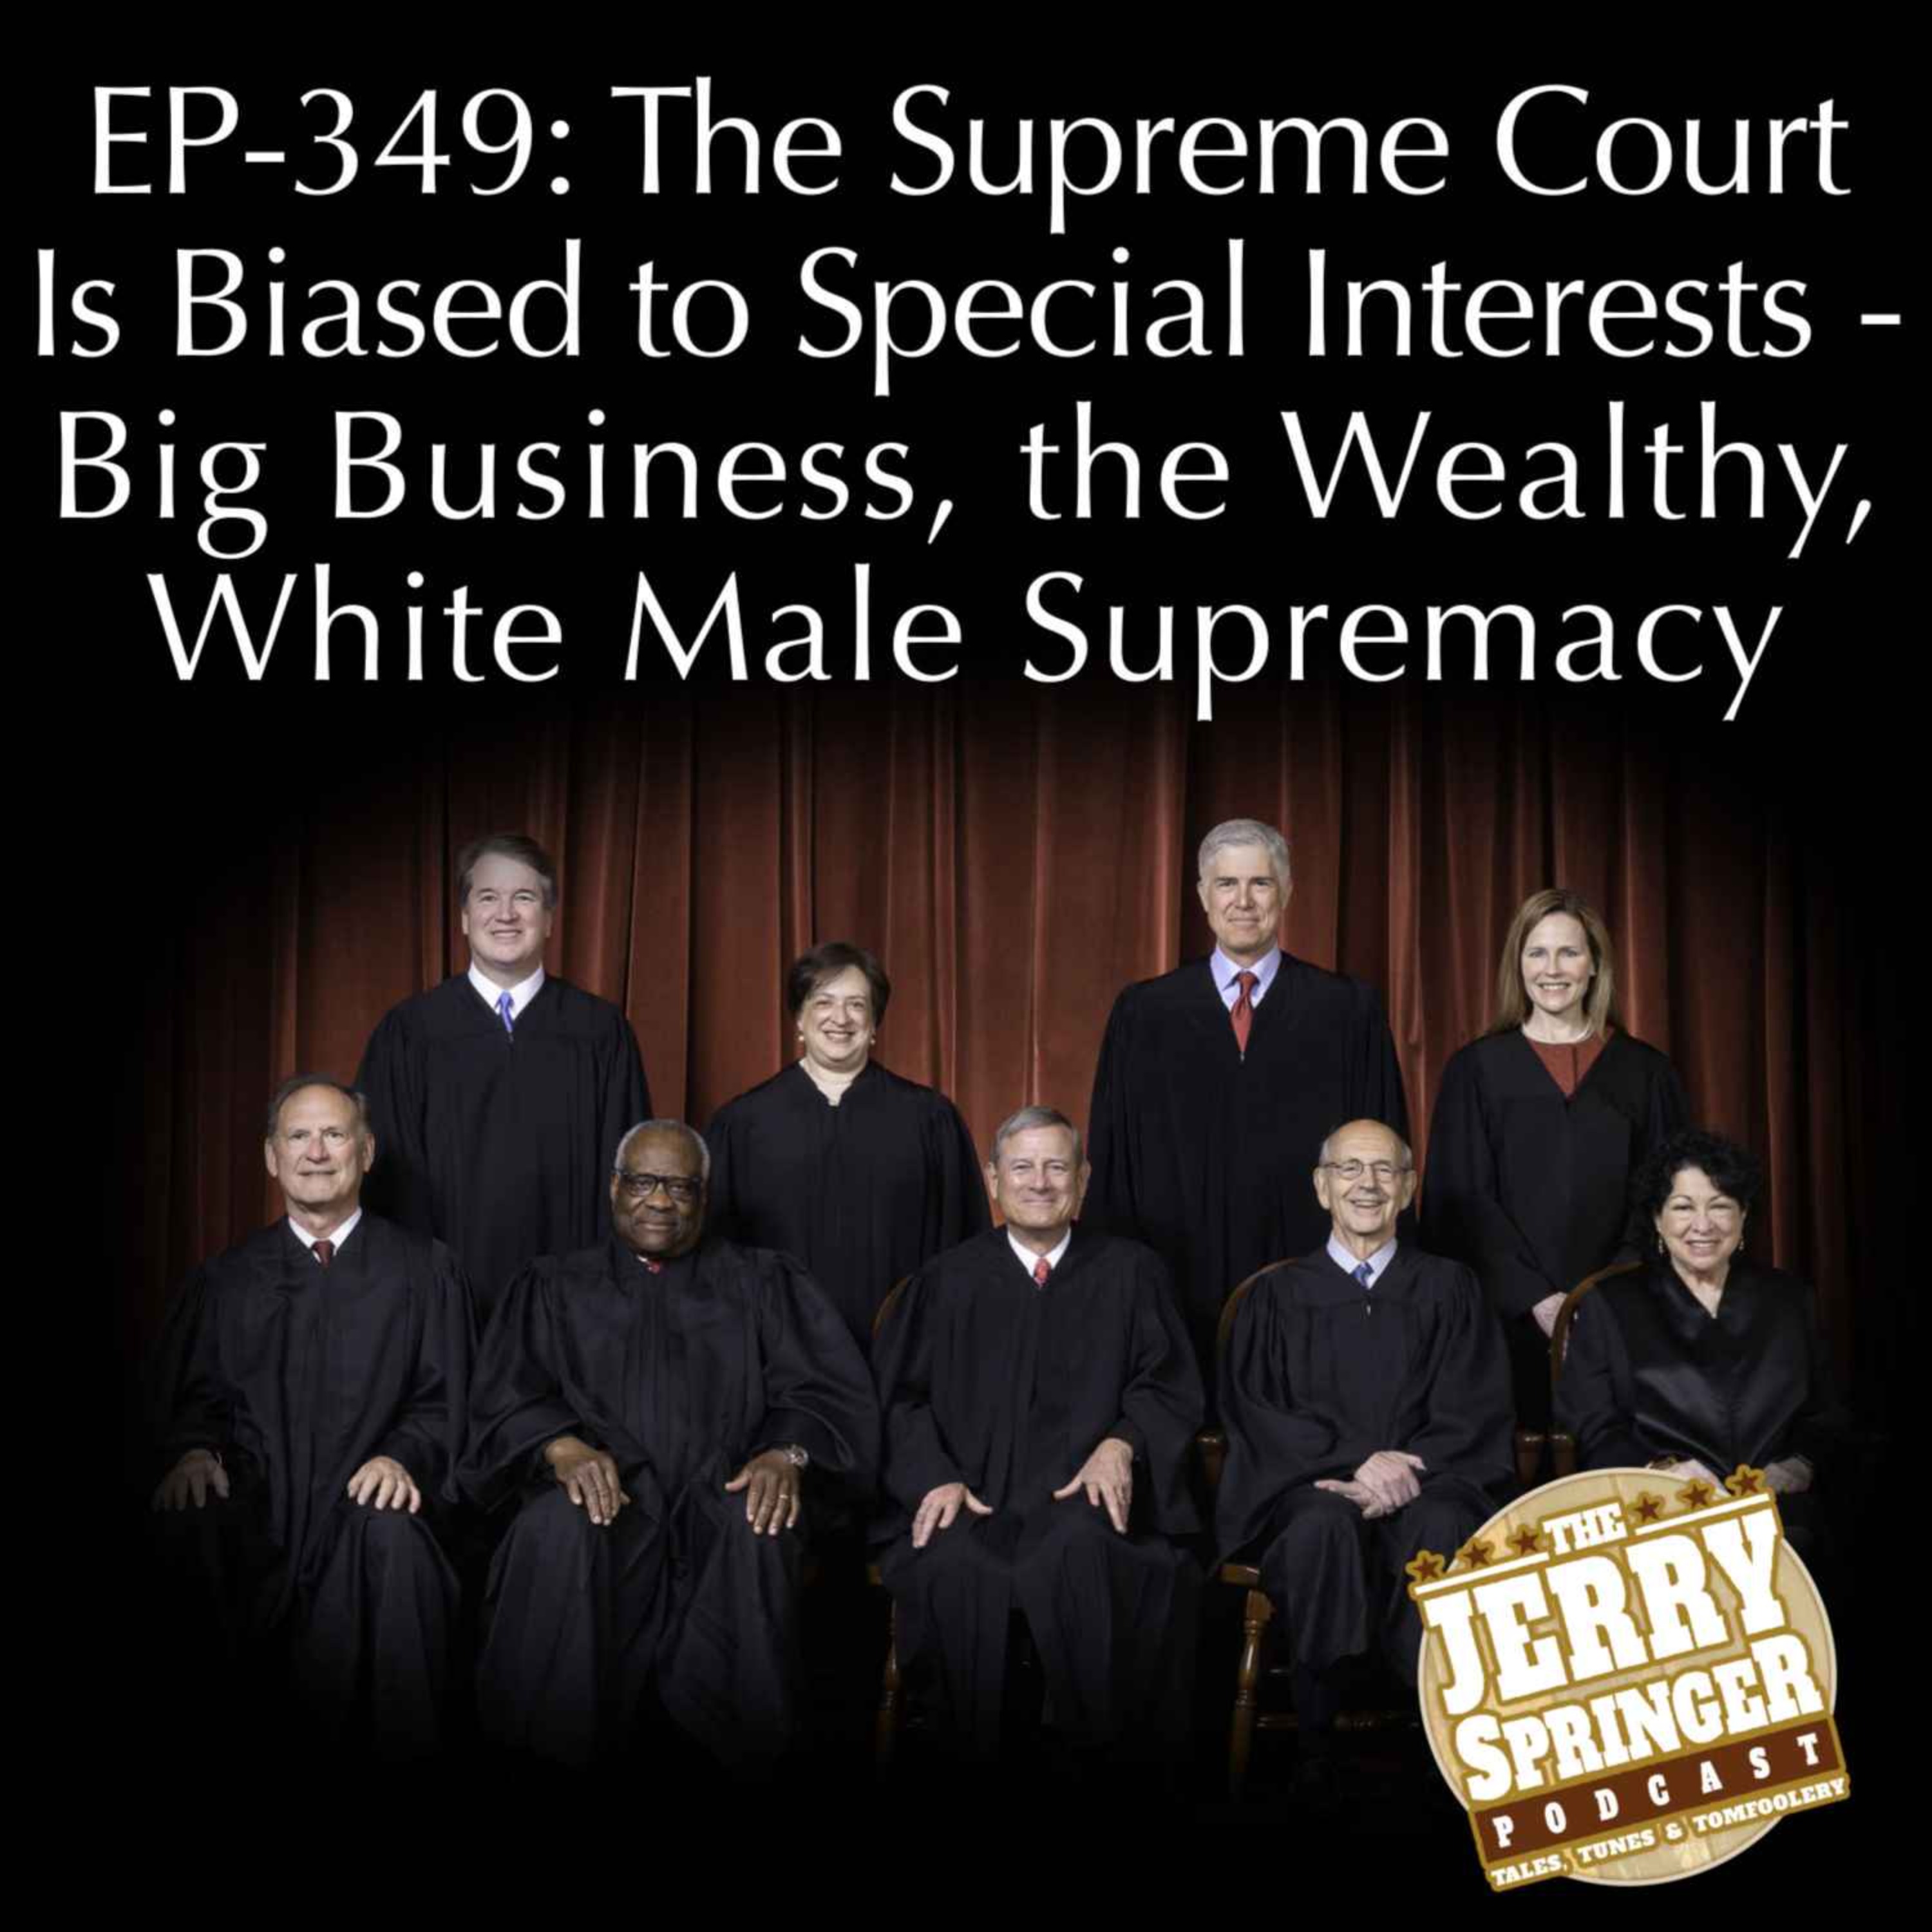 This Supreme Court is Biased to Special Interests - Big Business, the Wealthy, White Male Supremacy: EP - 349